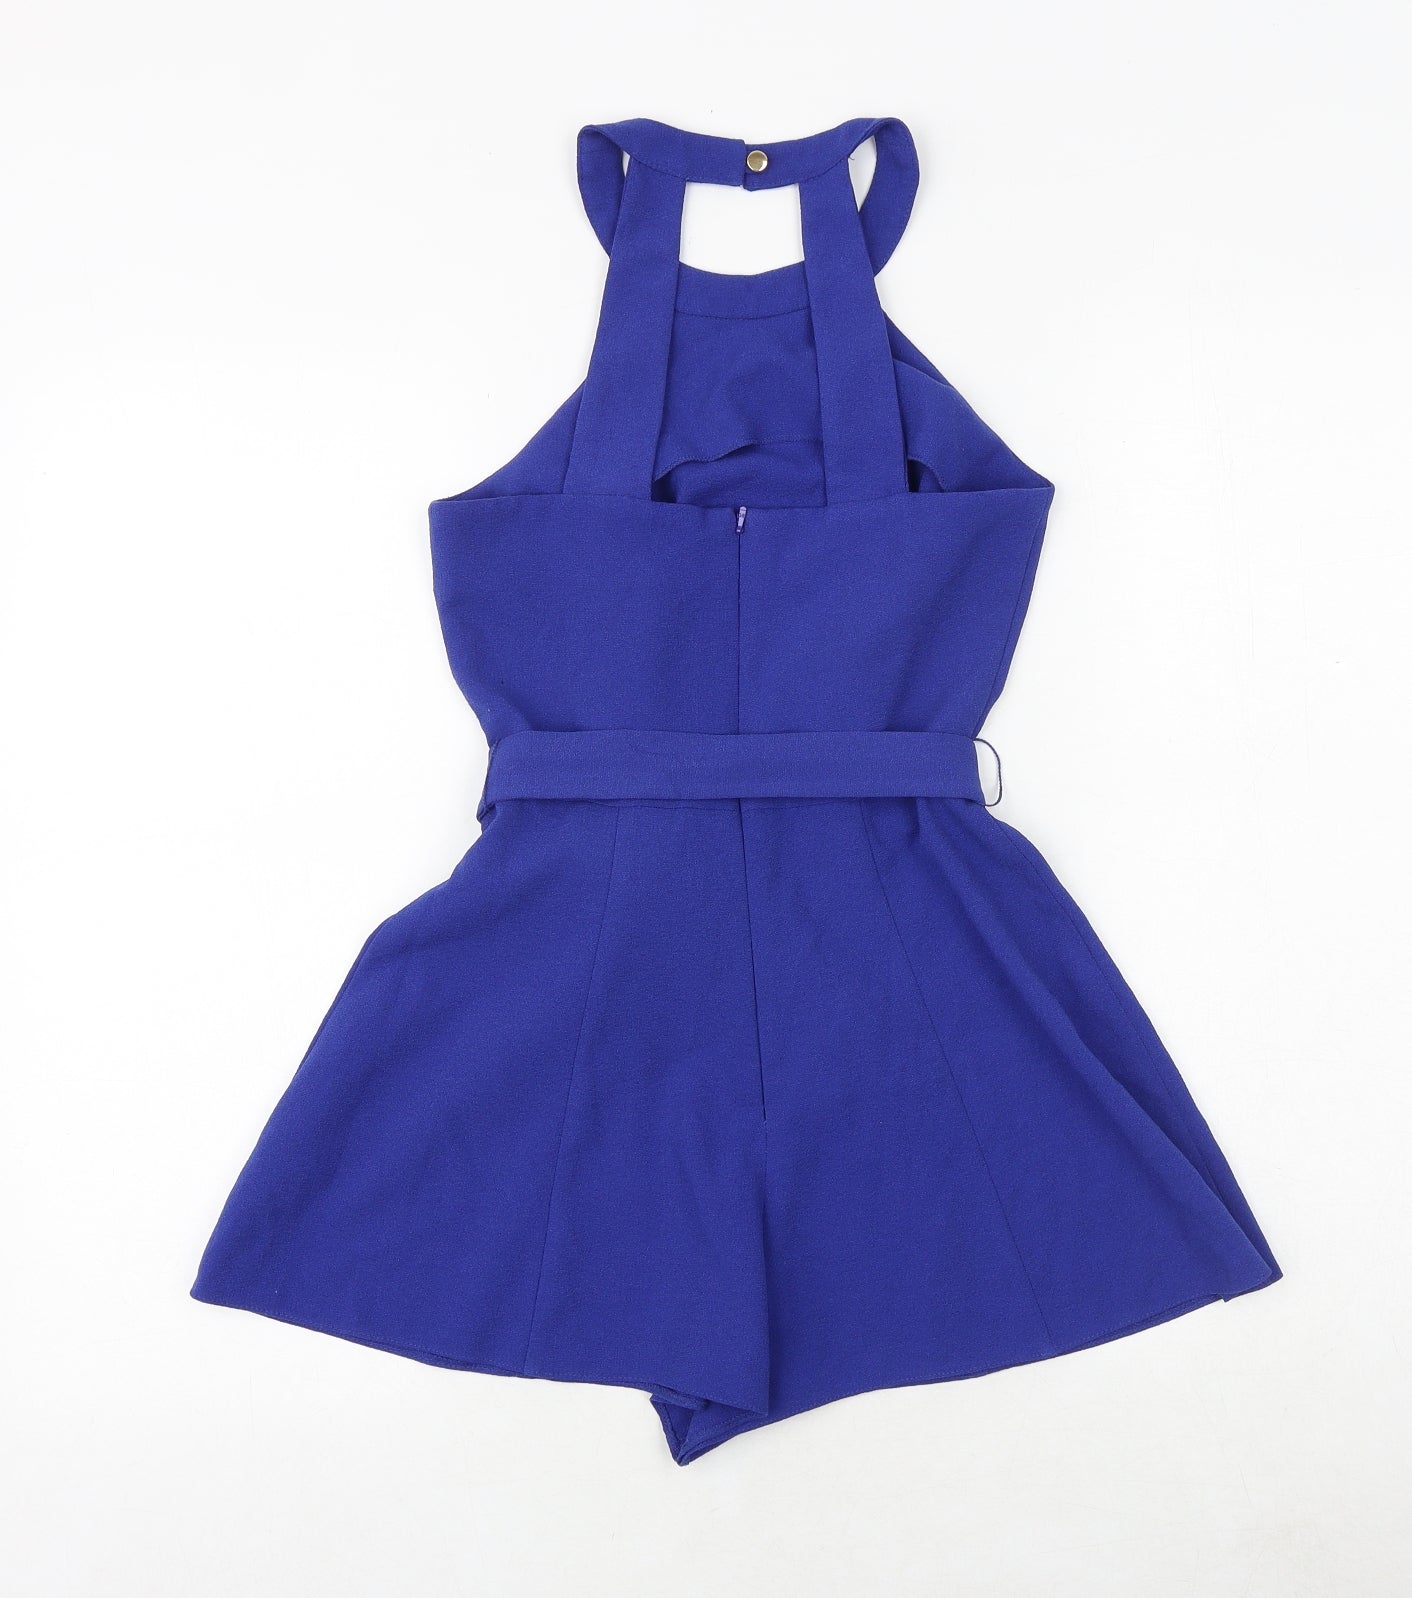 Miss Selfridge Womens Blue Polyester Playsuit One-Piece Size 4 Tie